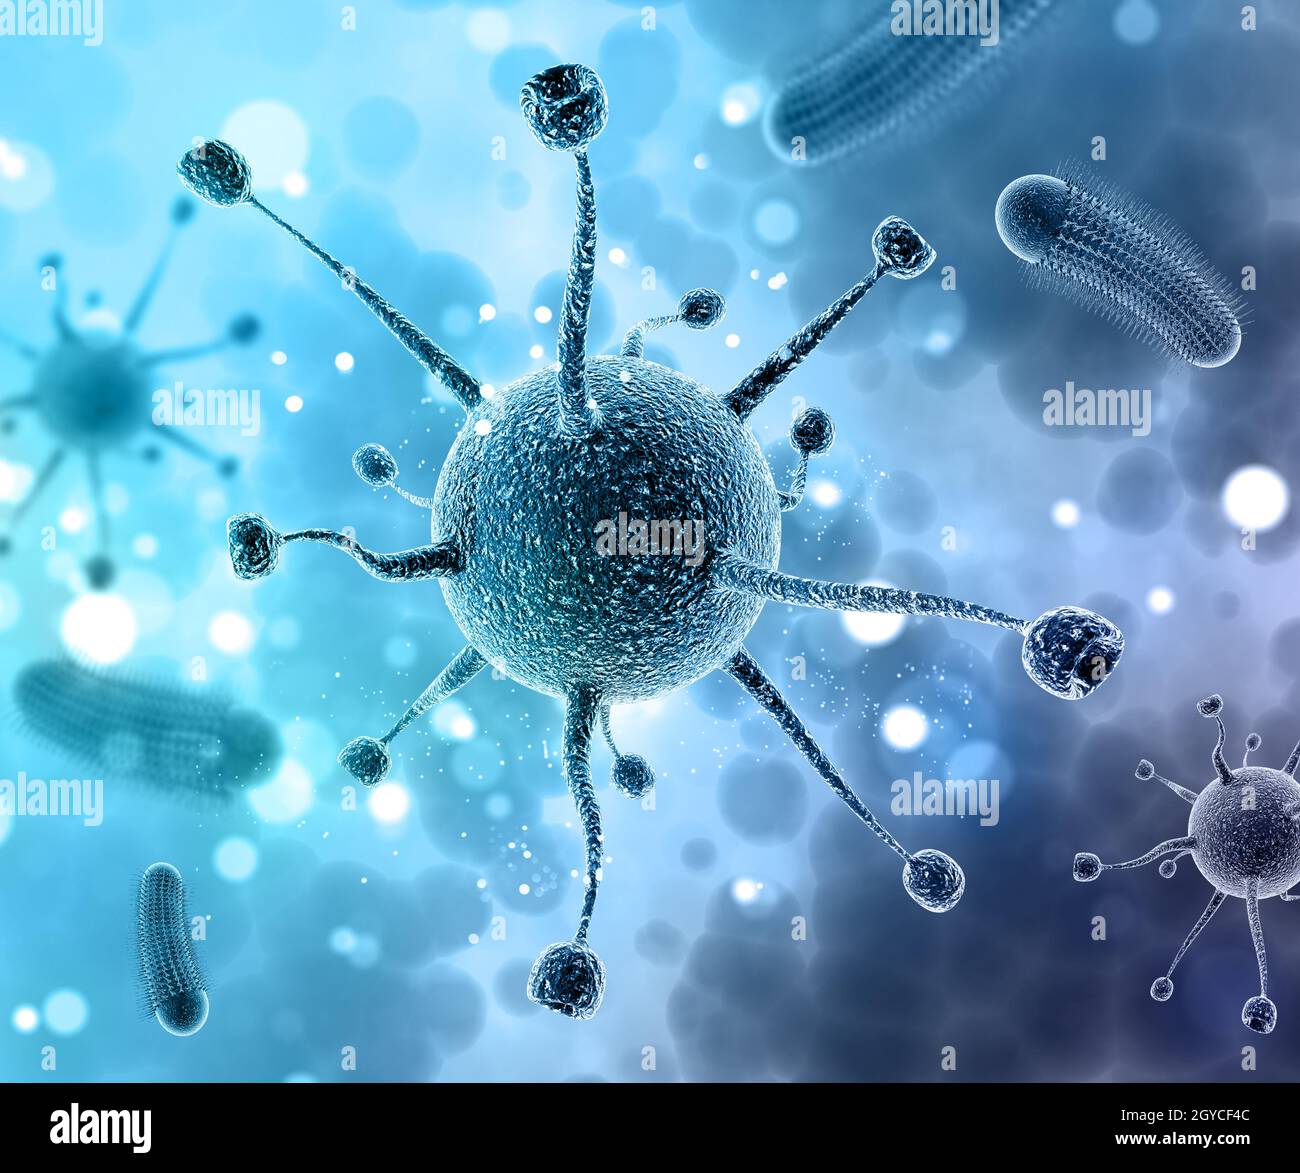 3D medical background with abstract virus cells Stock Photo